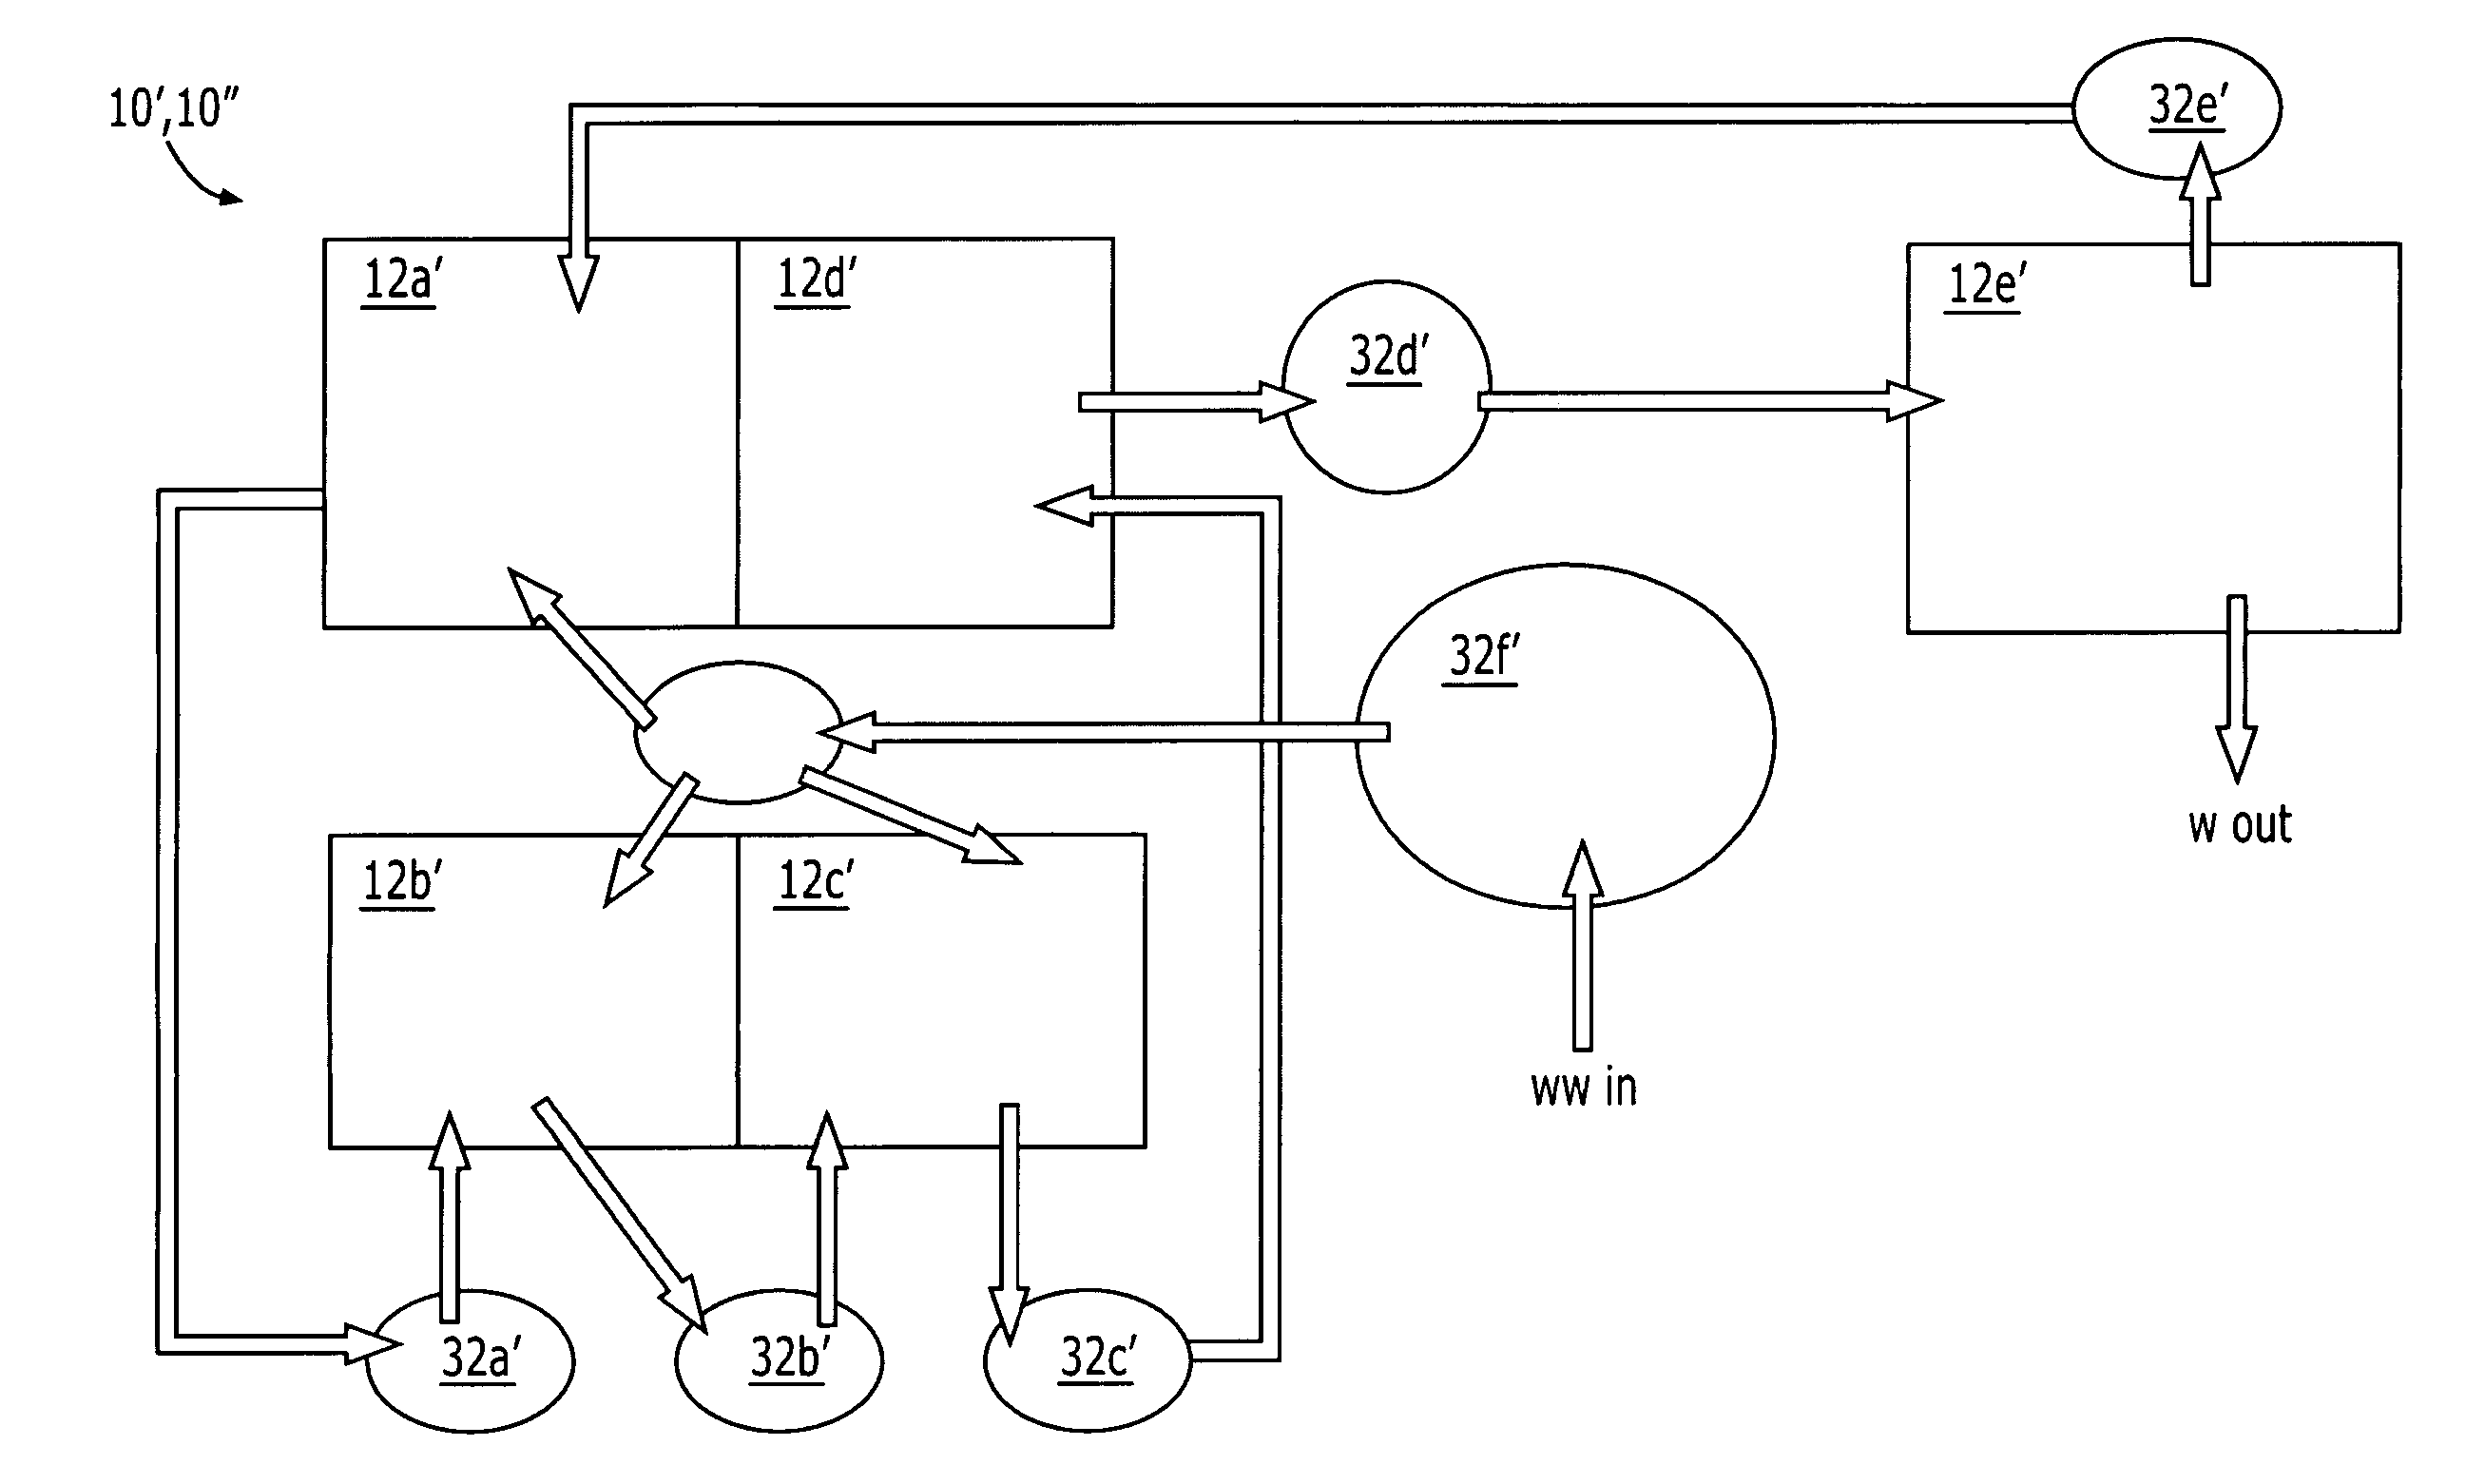 Tidal vertical flow wastewater treatment system and method